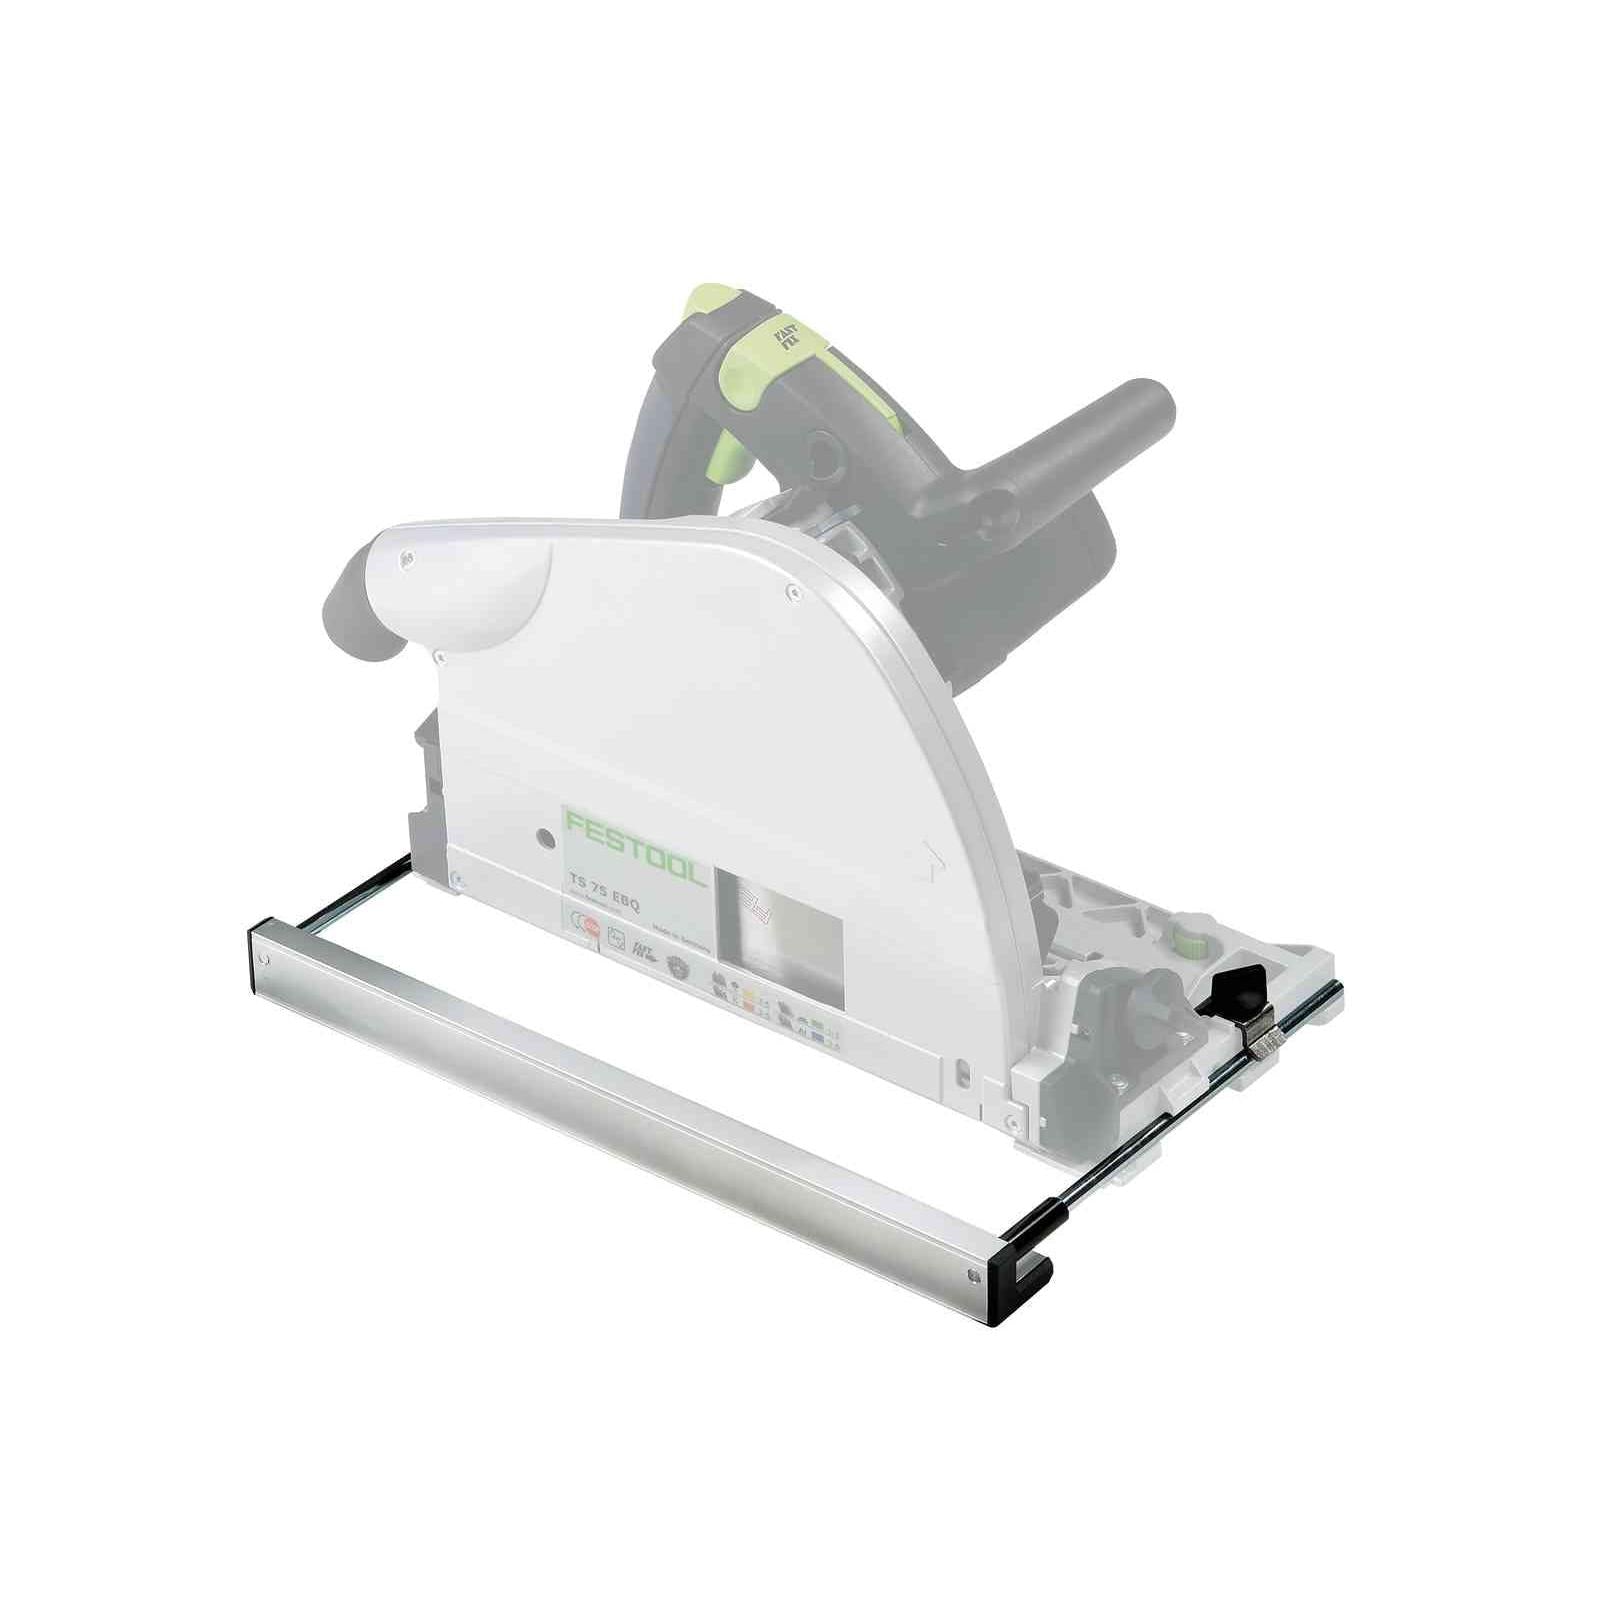 Festool Parallel side fence PA-TS 75 492243 Power Tool Services